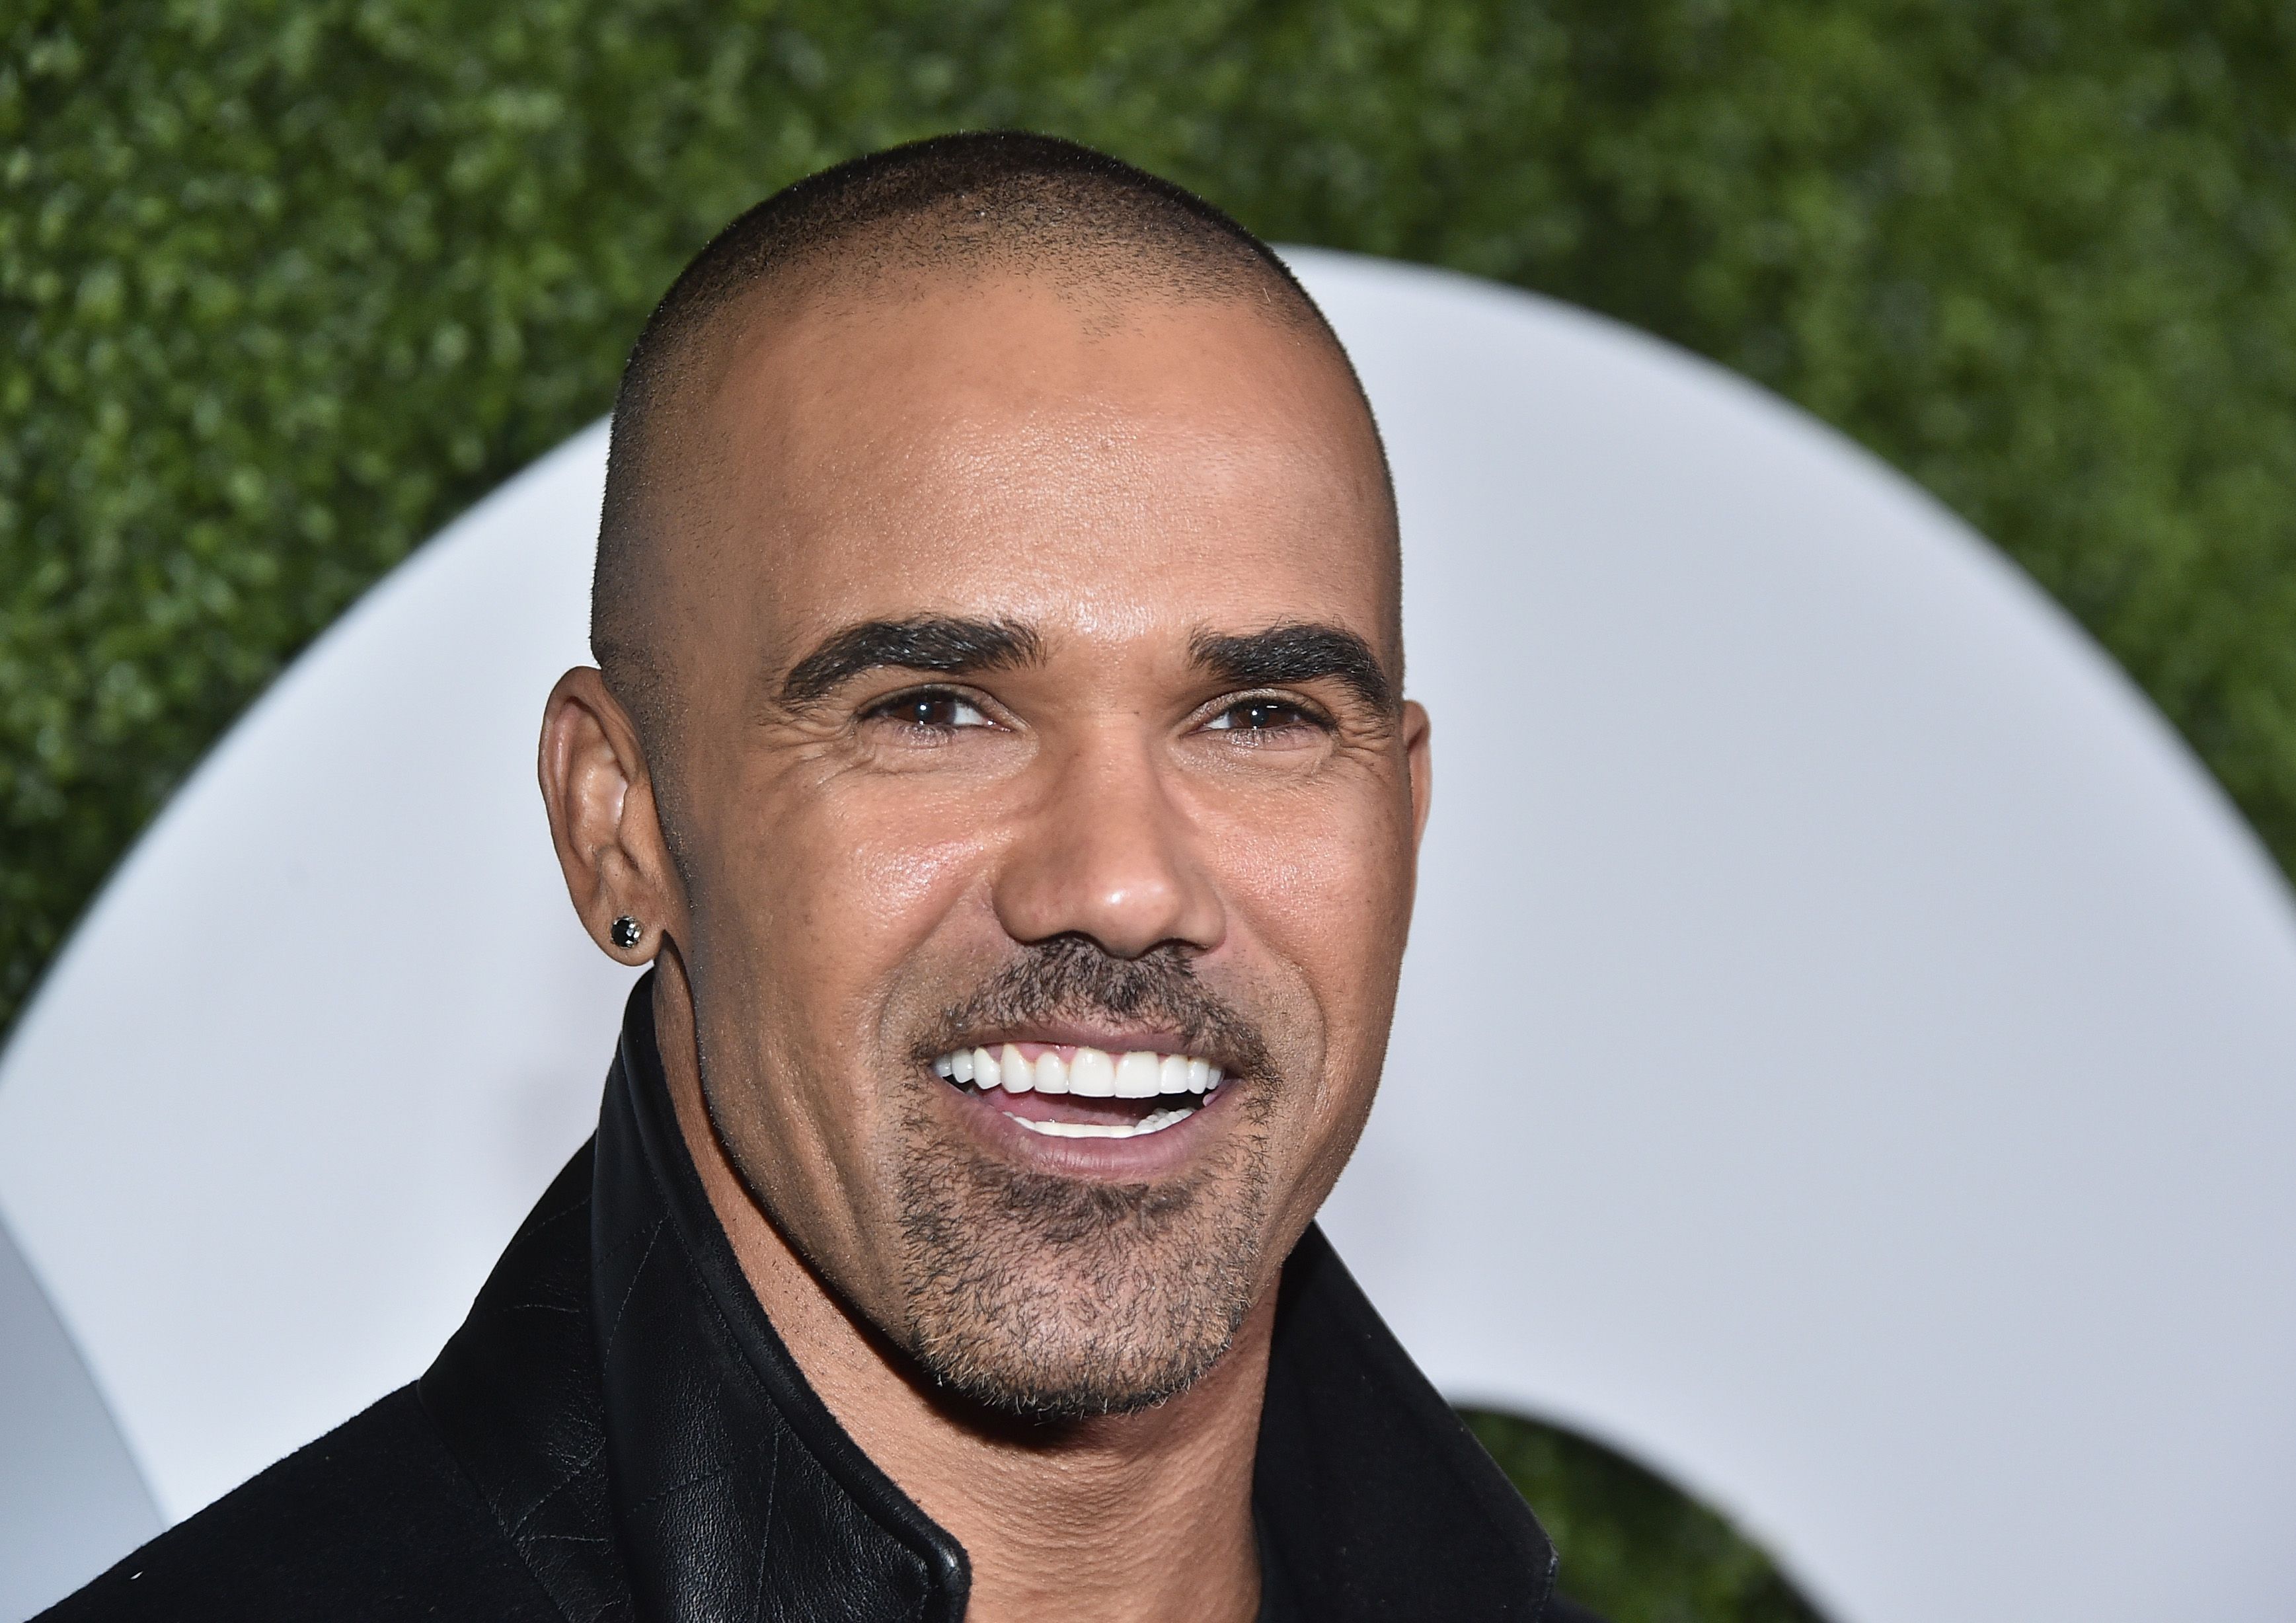 Criminal Minds star Shemar Moore is making a comeback as lead of the new SWAT TV series